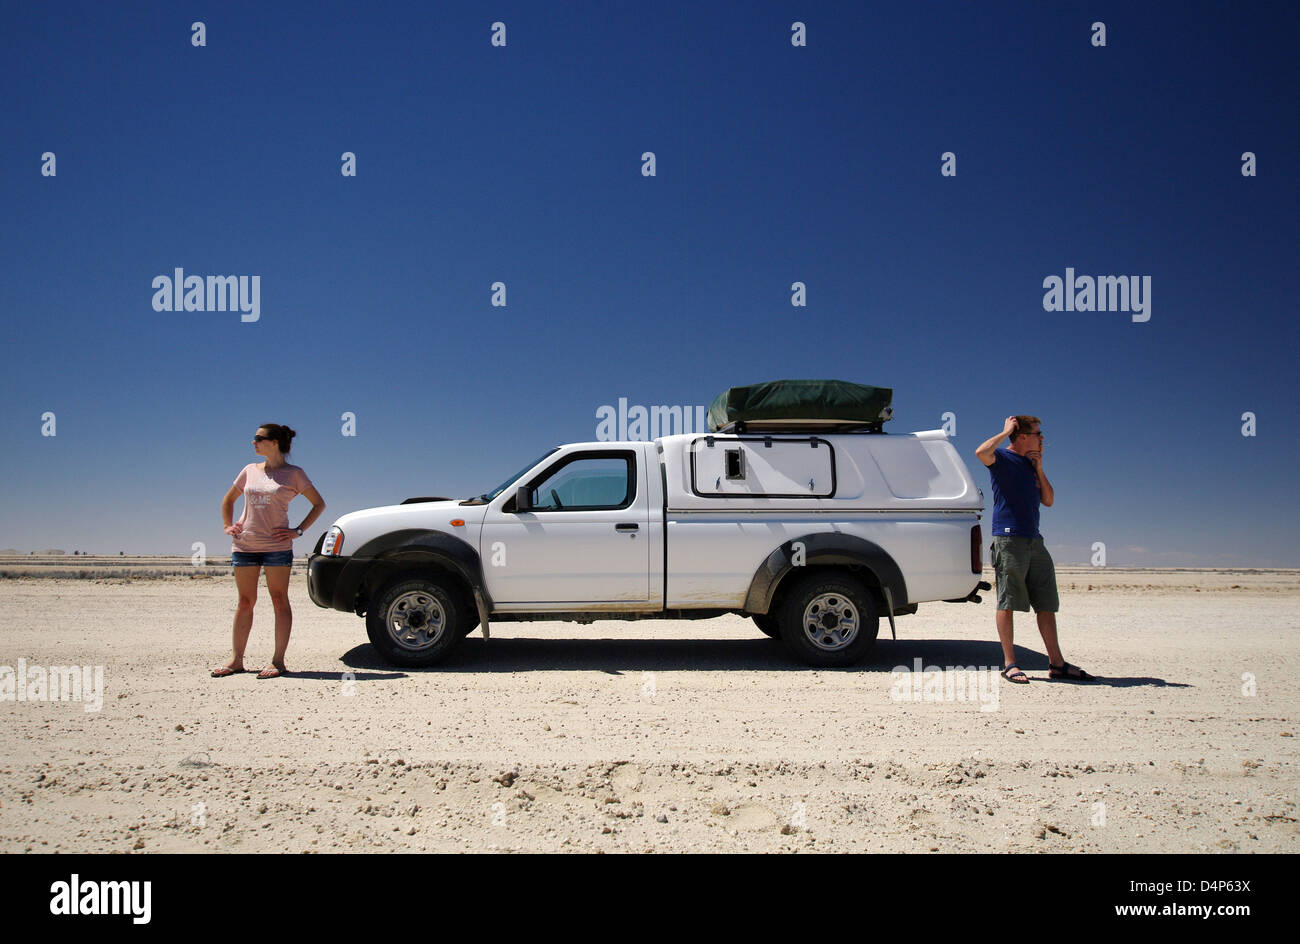 Lost in the desert - Namibia Stock Photo